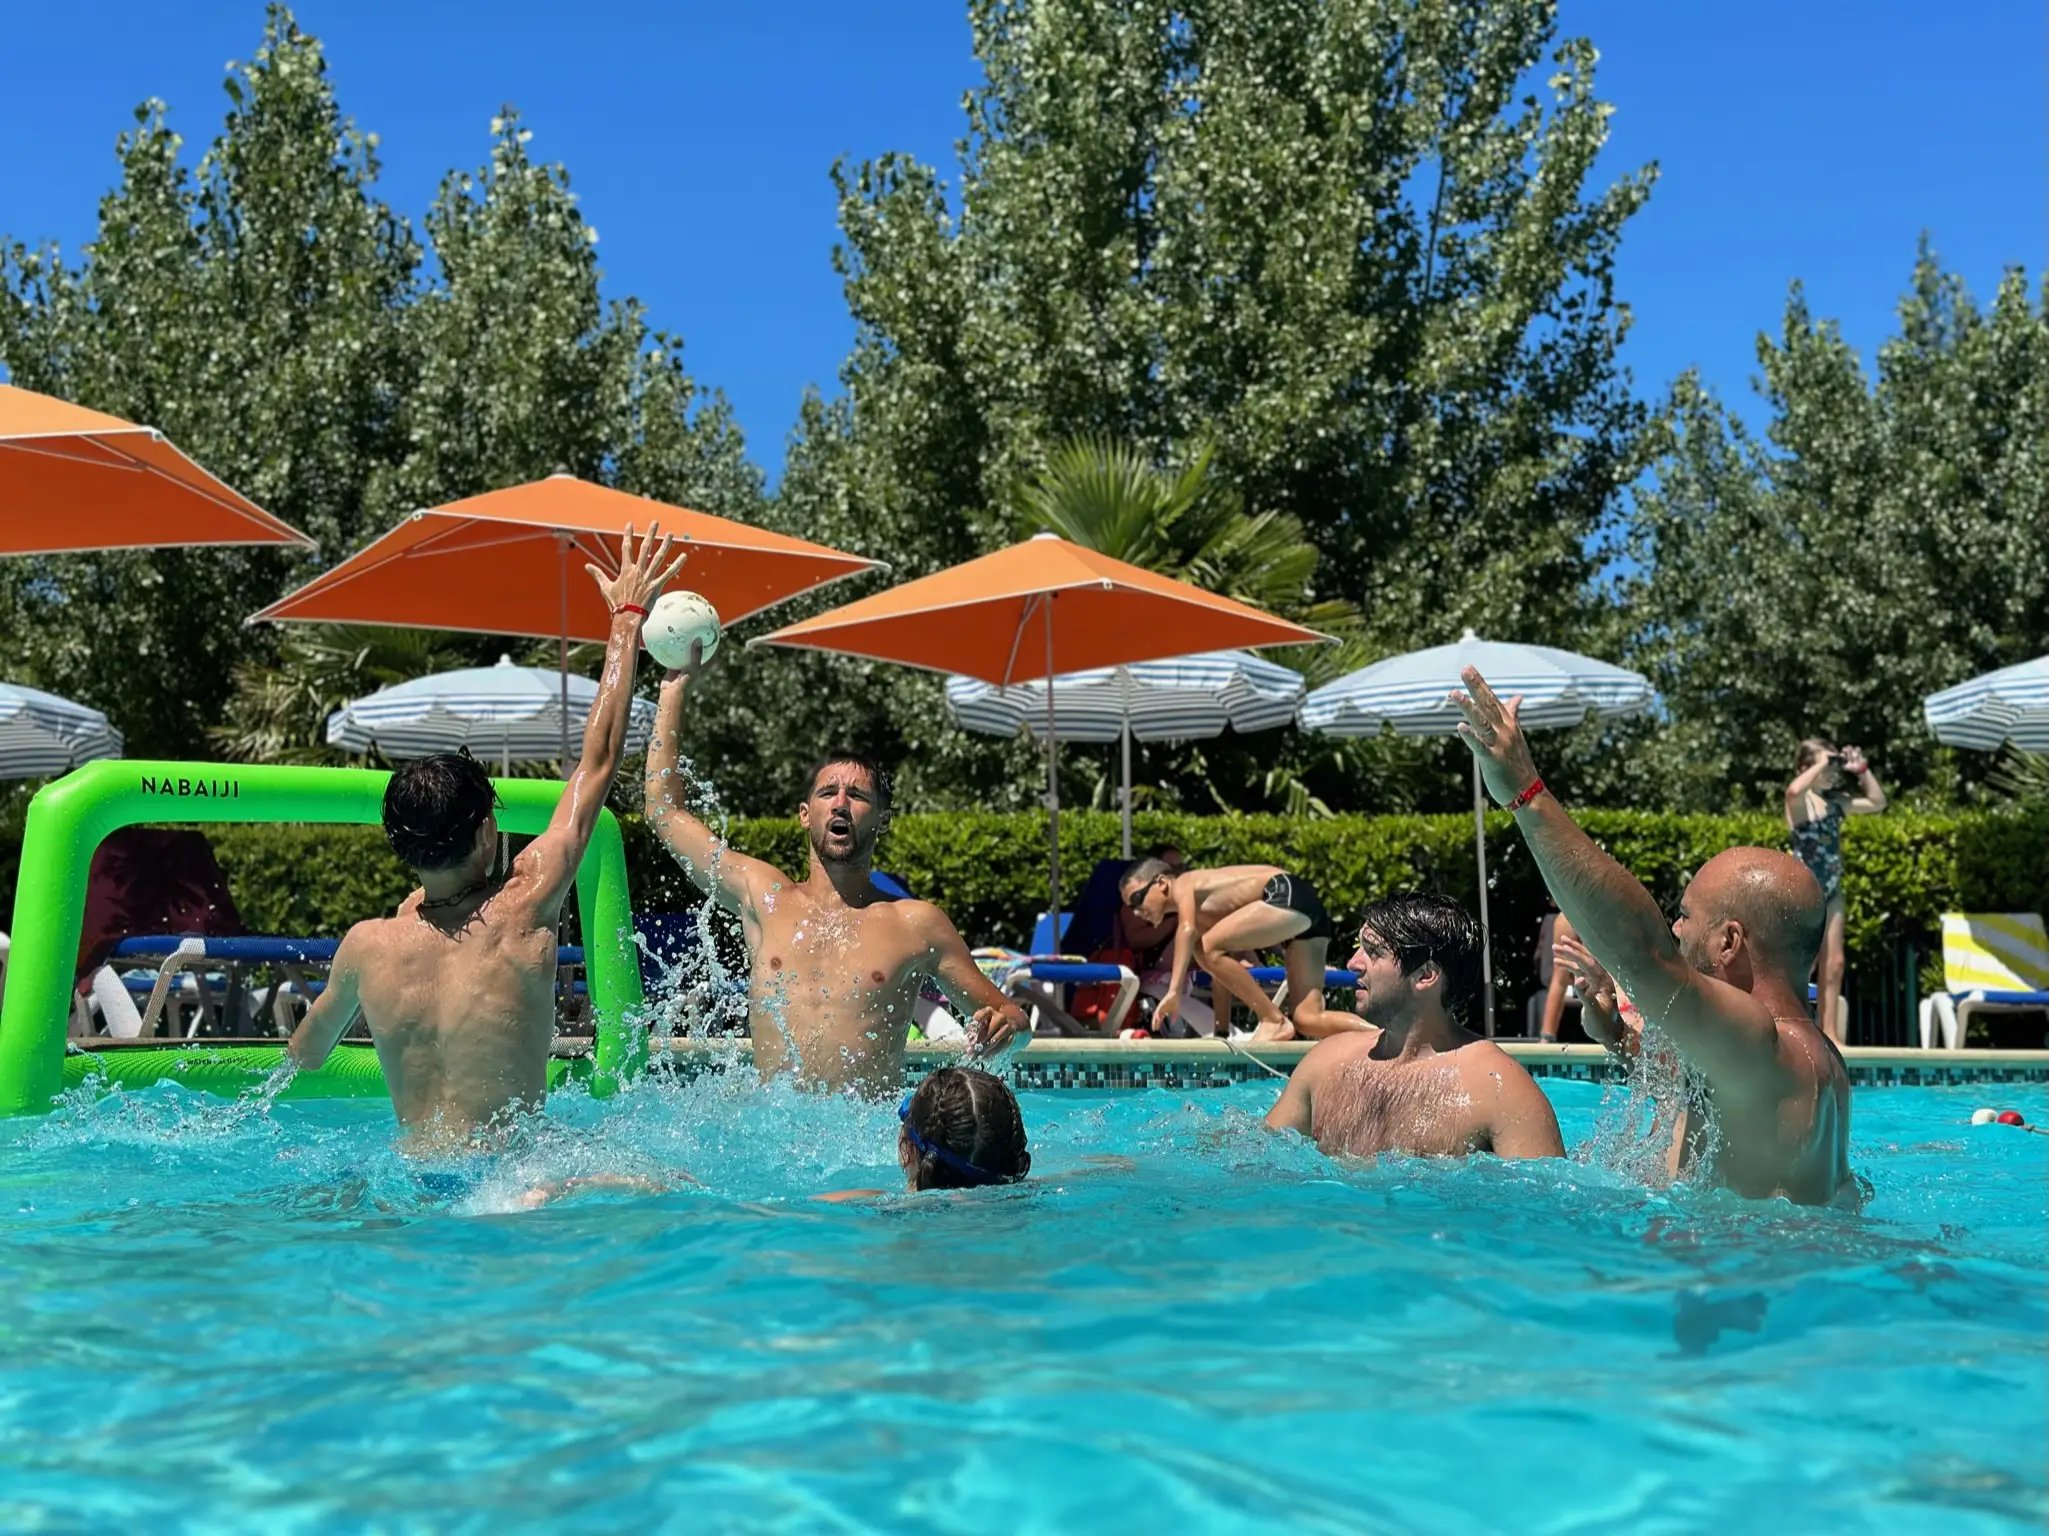 camping pool amis vacances pays basque